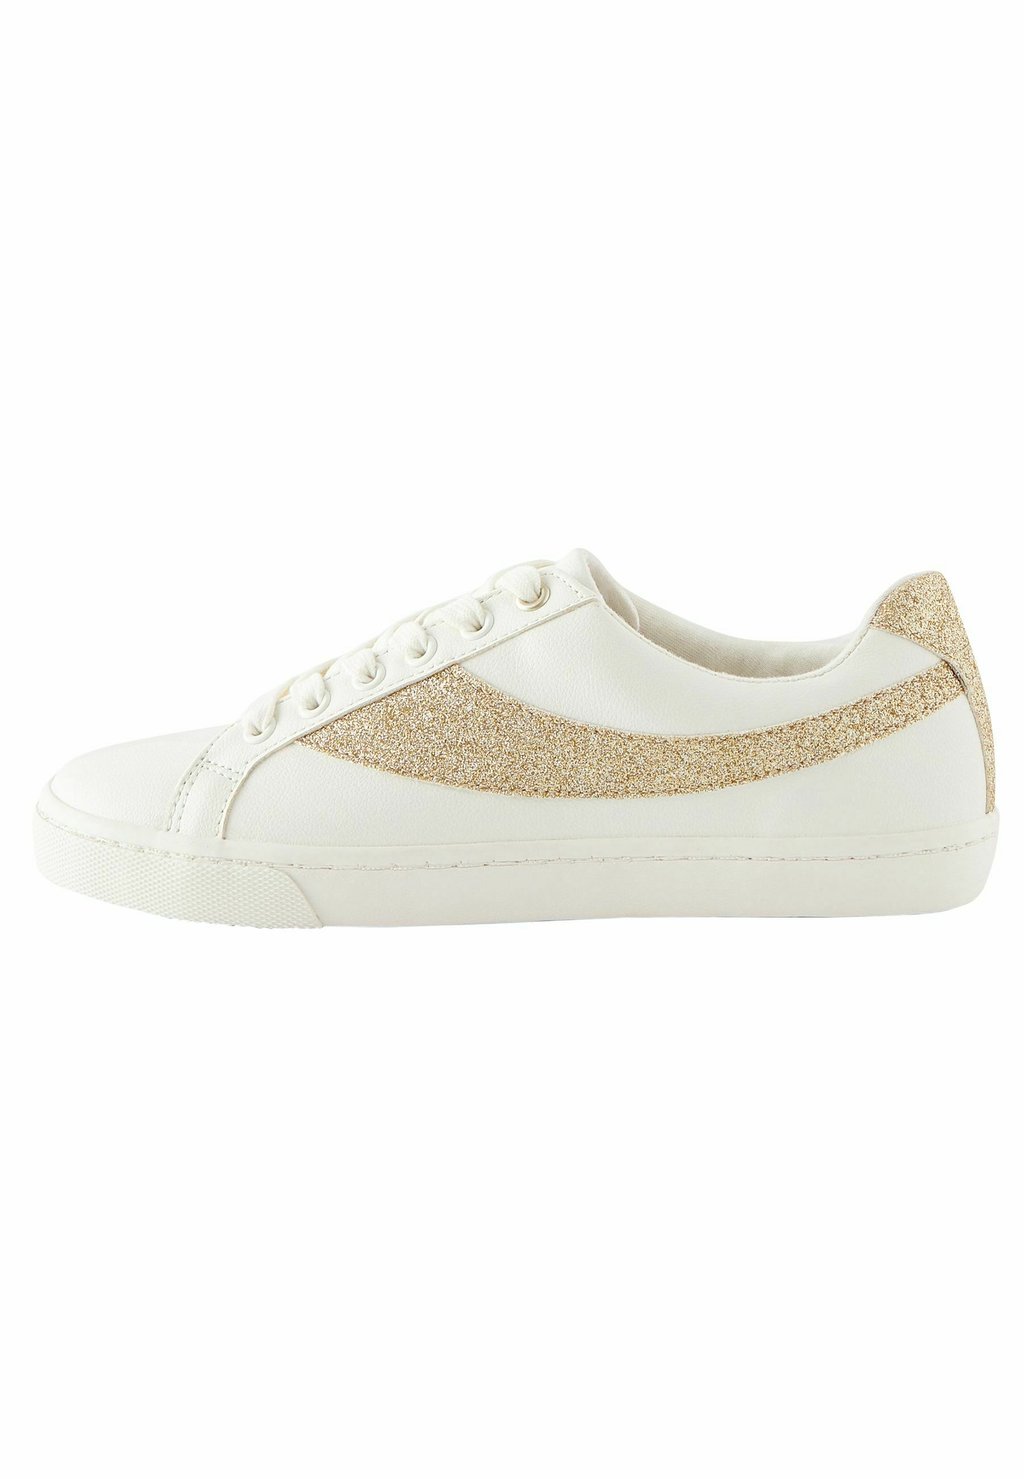 Низкие кроссовки Forever Comfort Glitter Next, белый кроссовки next forever comfort star white and silver